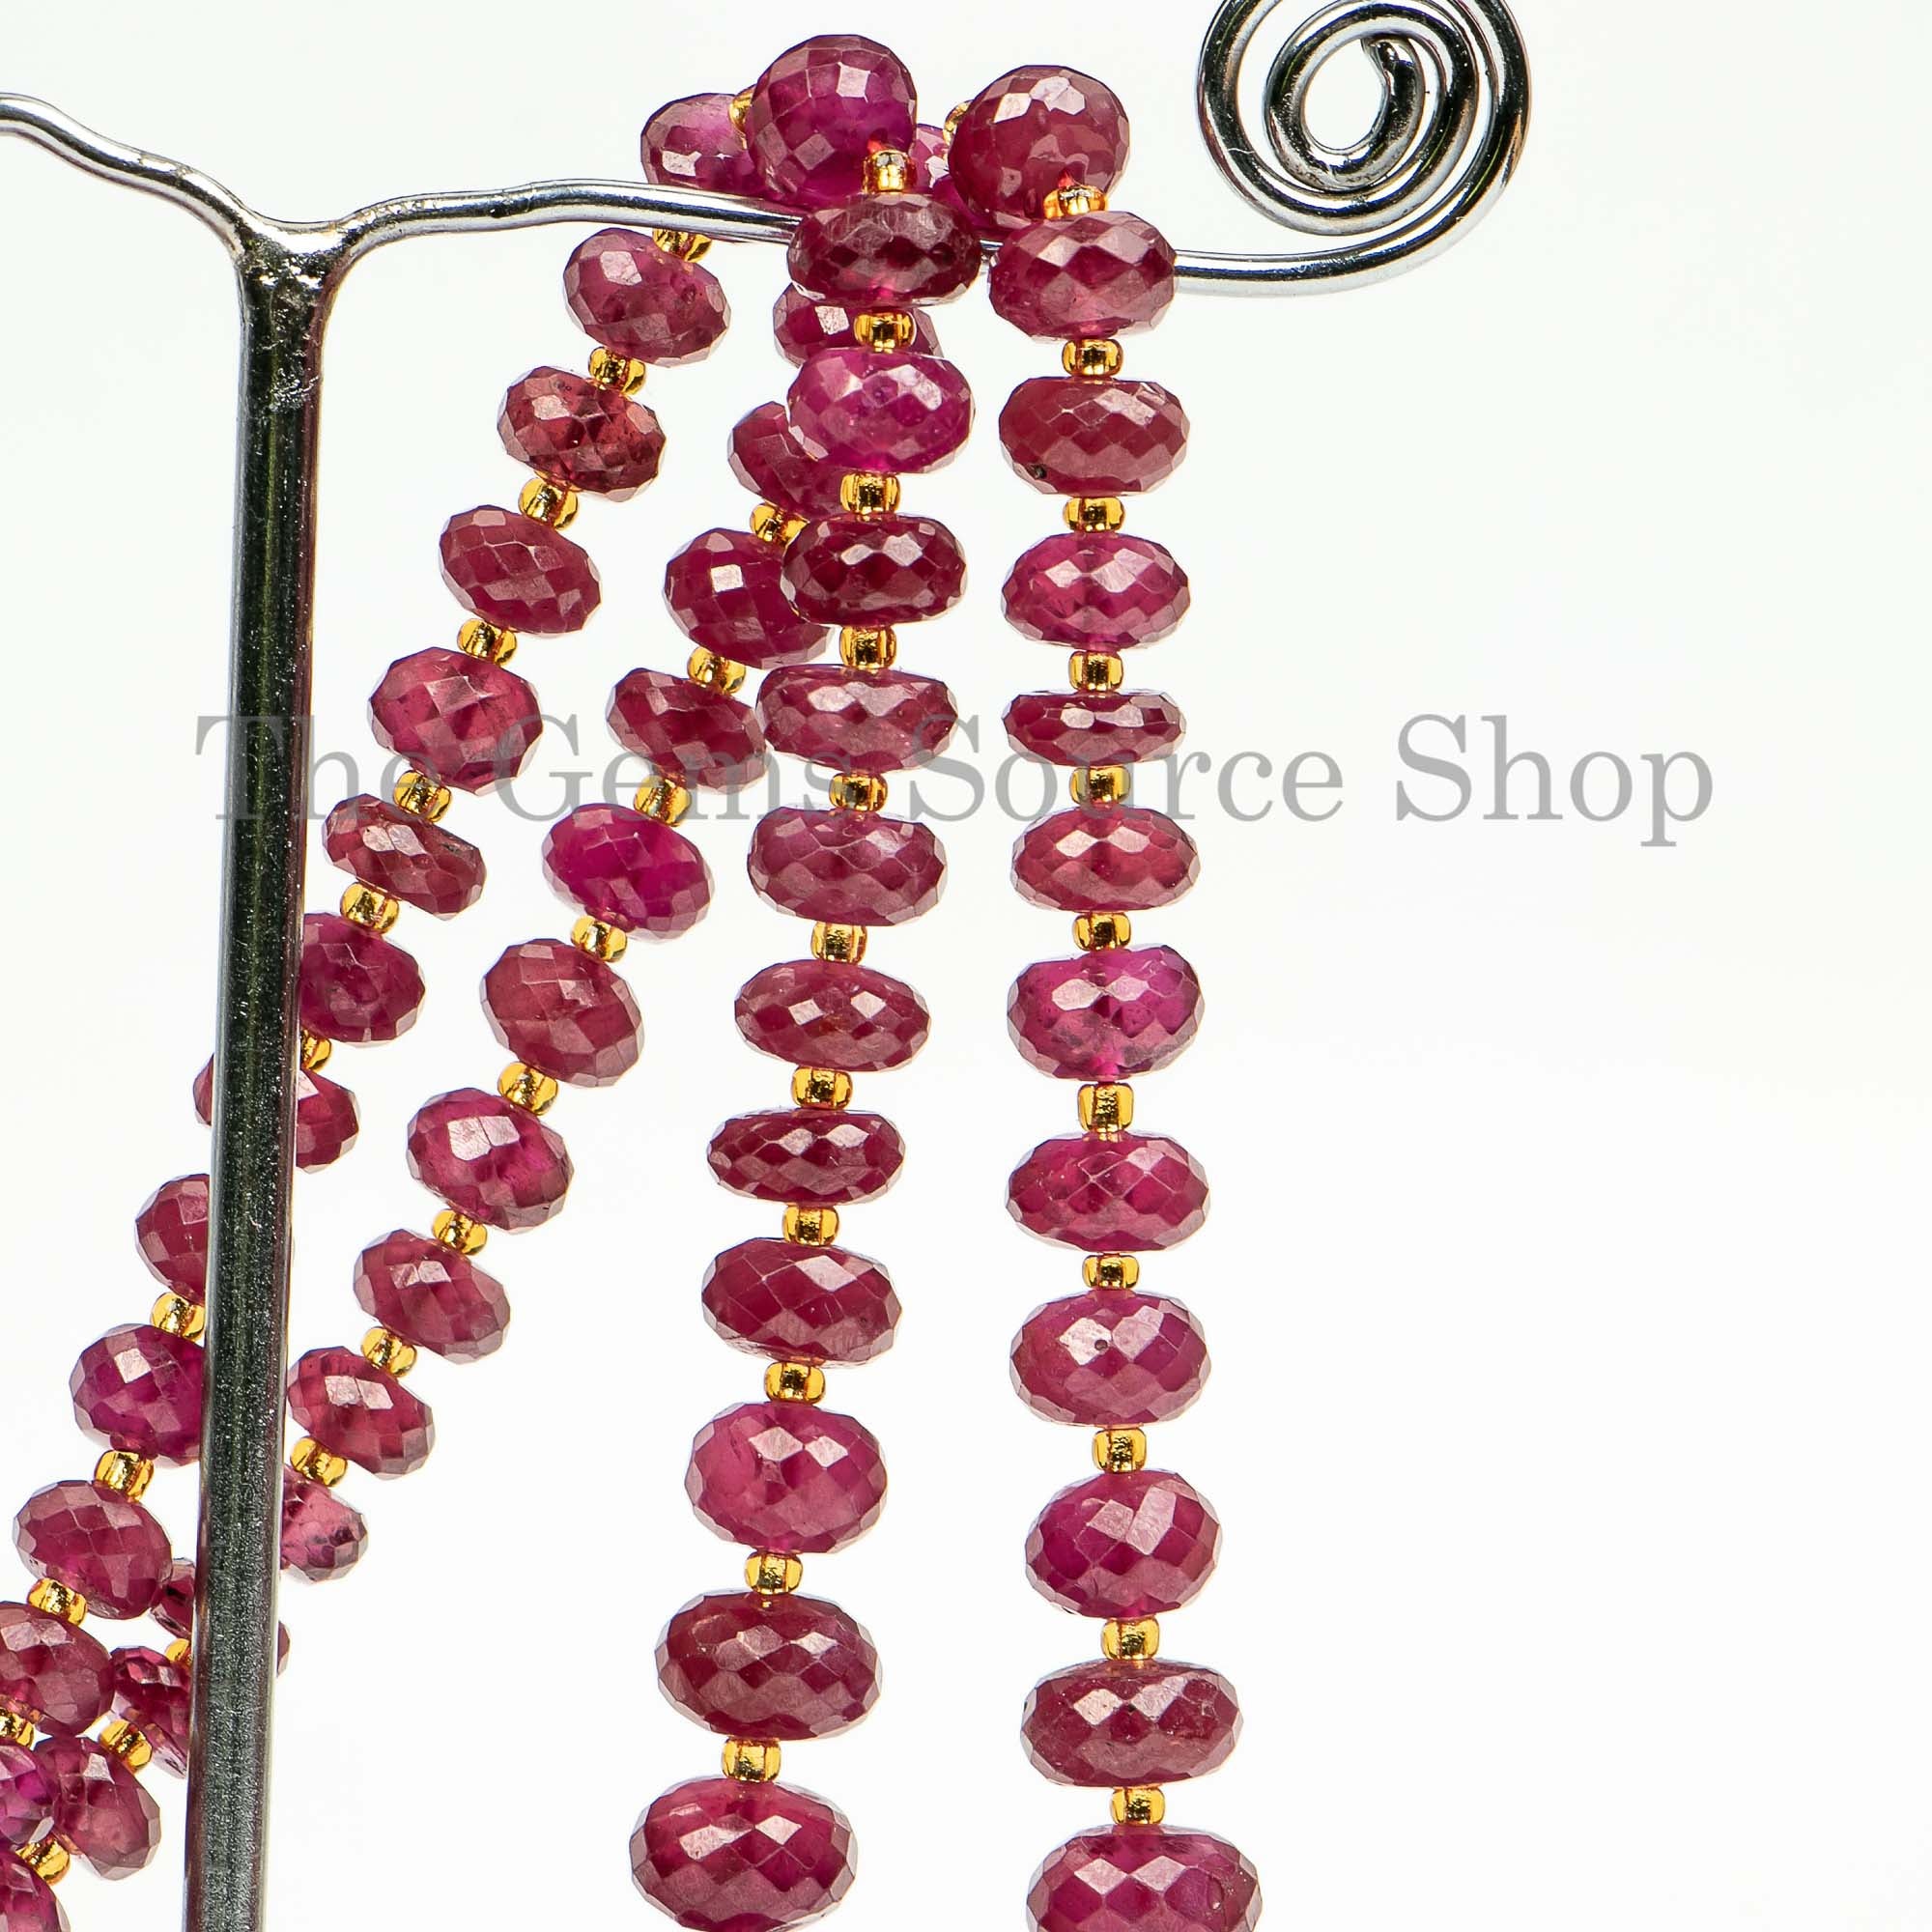 Natural Ruby Rondelle Beads, 5-9mm Ruby Beads, Ruby Rondelle Beads, Gemstone Rondelle Beads